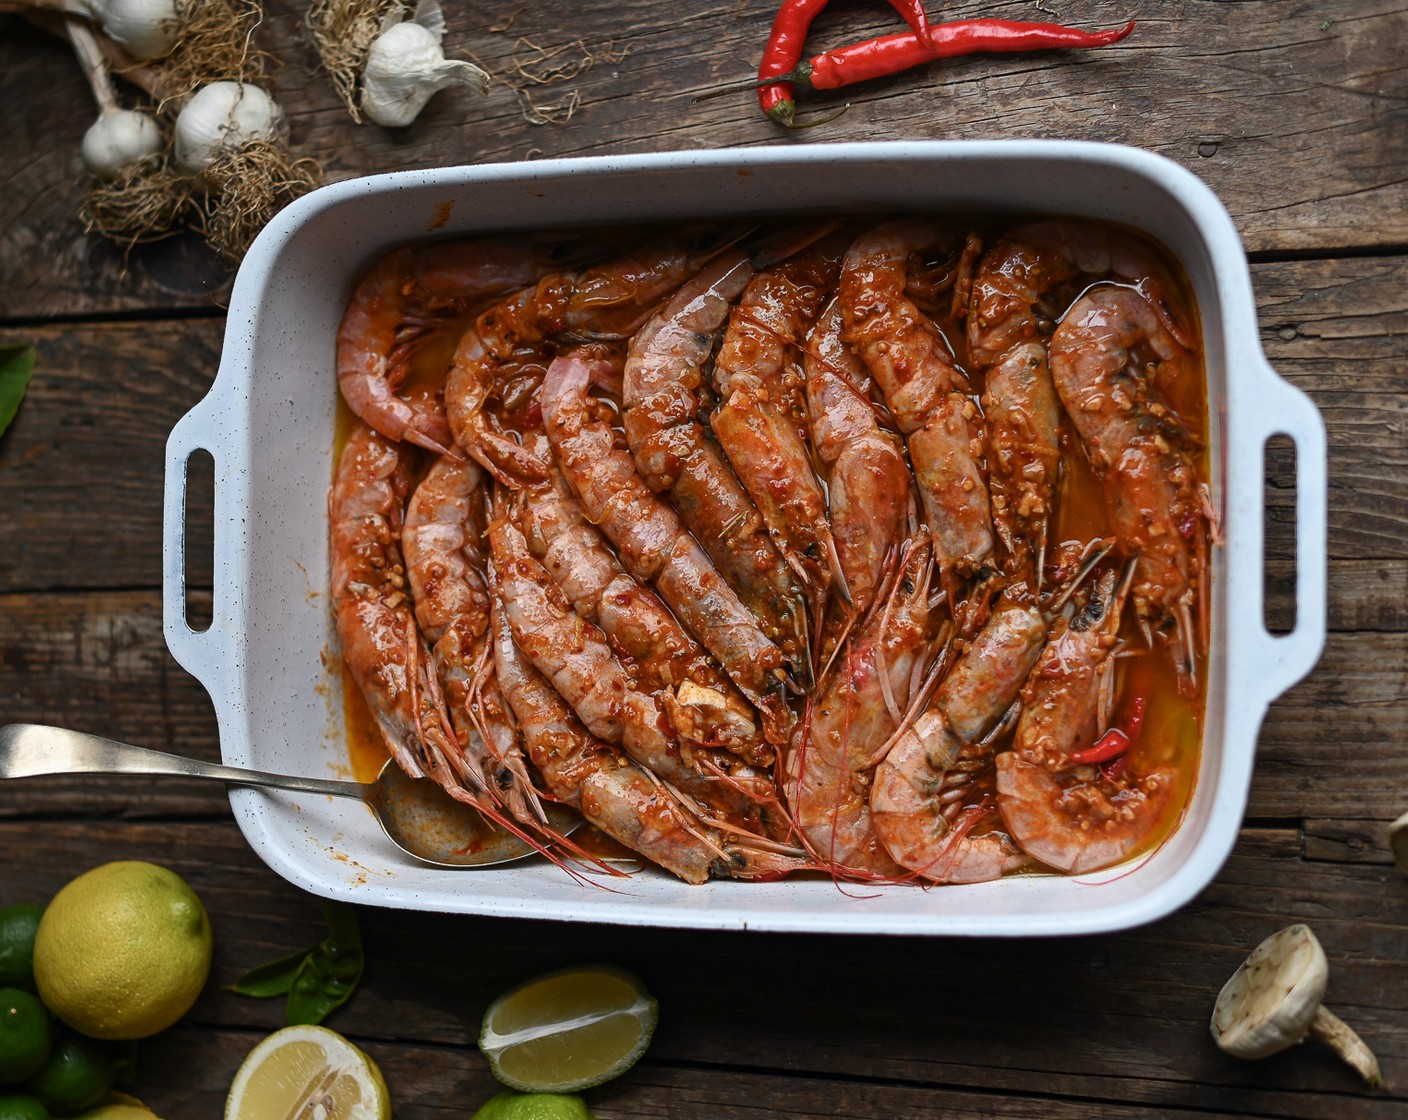 step 4 Arrange the cleaned prawns in a large ovenproof dish and pour over the paprika butter.  If cooking the prawns in the oven, place them in the dish under a hot 425 degrees F (220 degrees C) grill for 2-3 minutes per side.